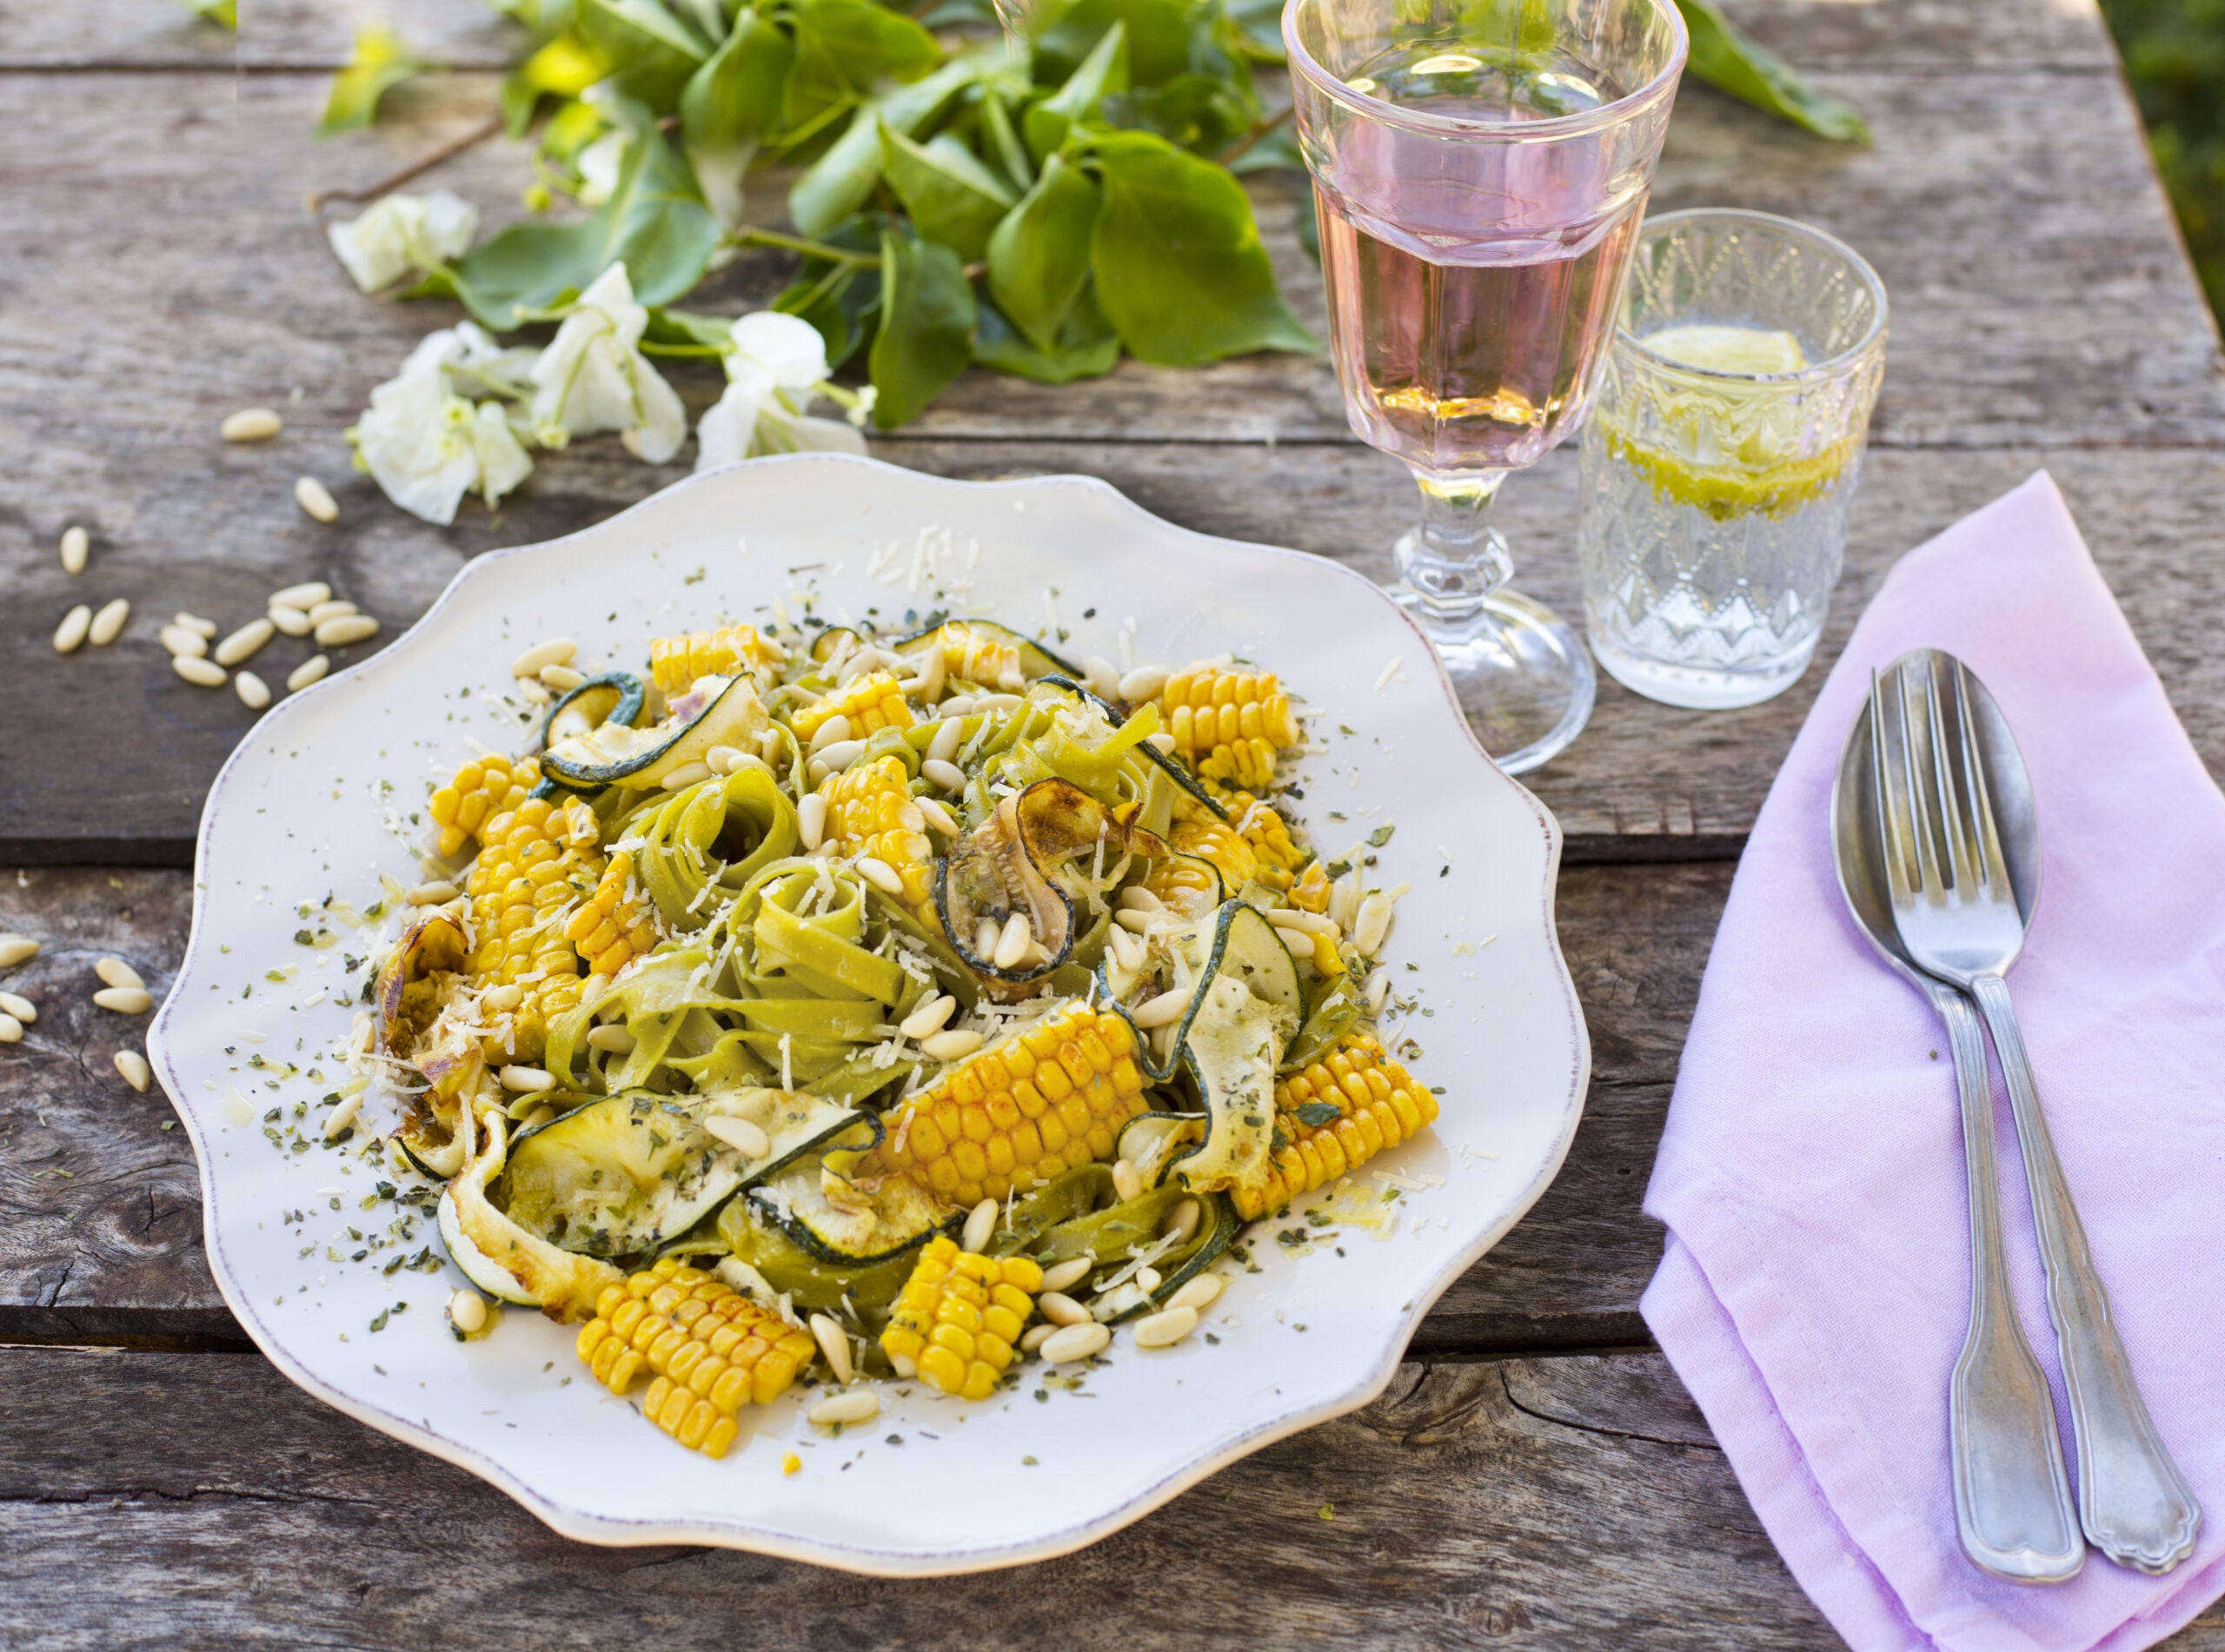 SPINACH TAGLIATELLE WITH GRILLED COURGETTE, CORN AND TOASTED PINE NUTS